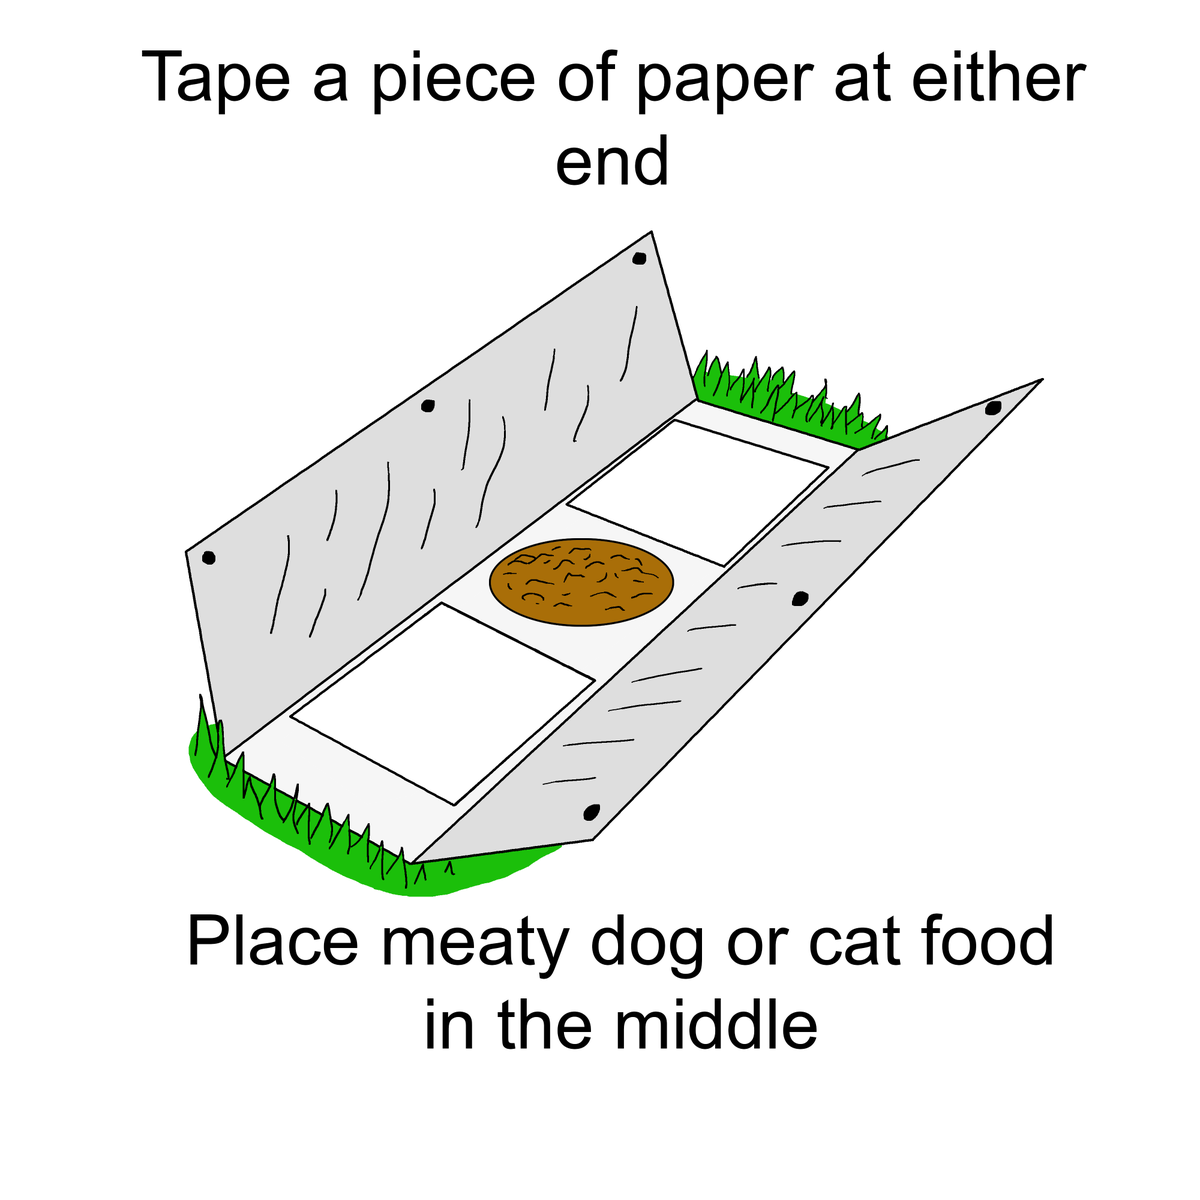 Step 2: Tape down a piece of paper at either end to capture any animal tracks. Place a bowl of meaty dog or cat food in the middle.